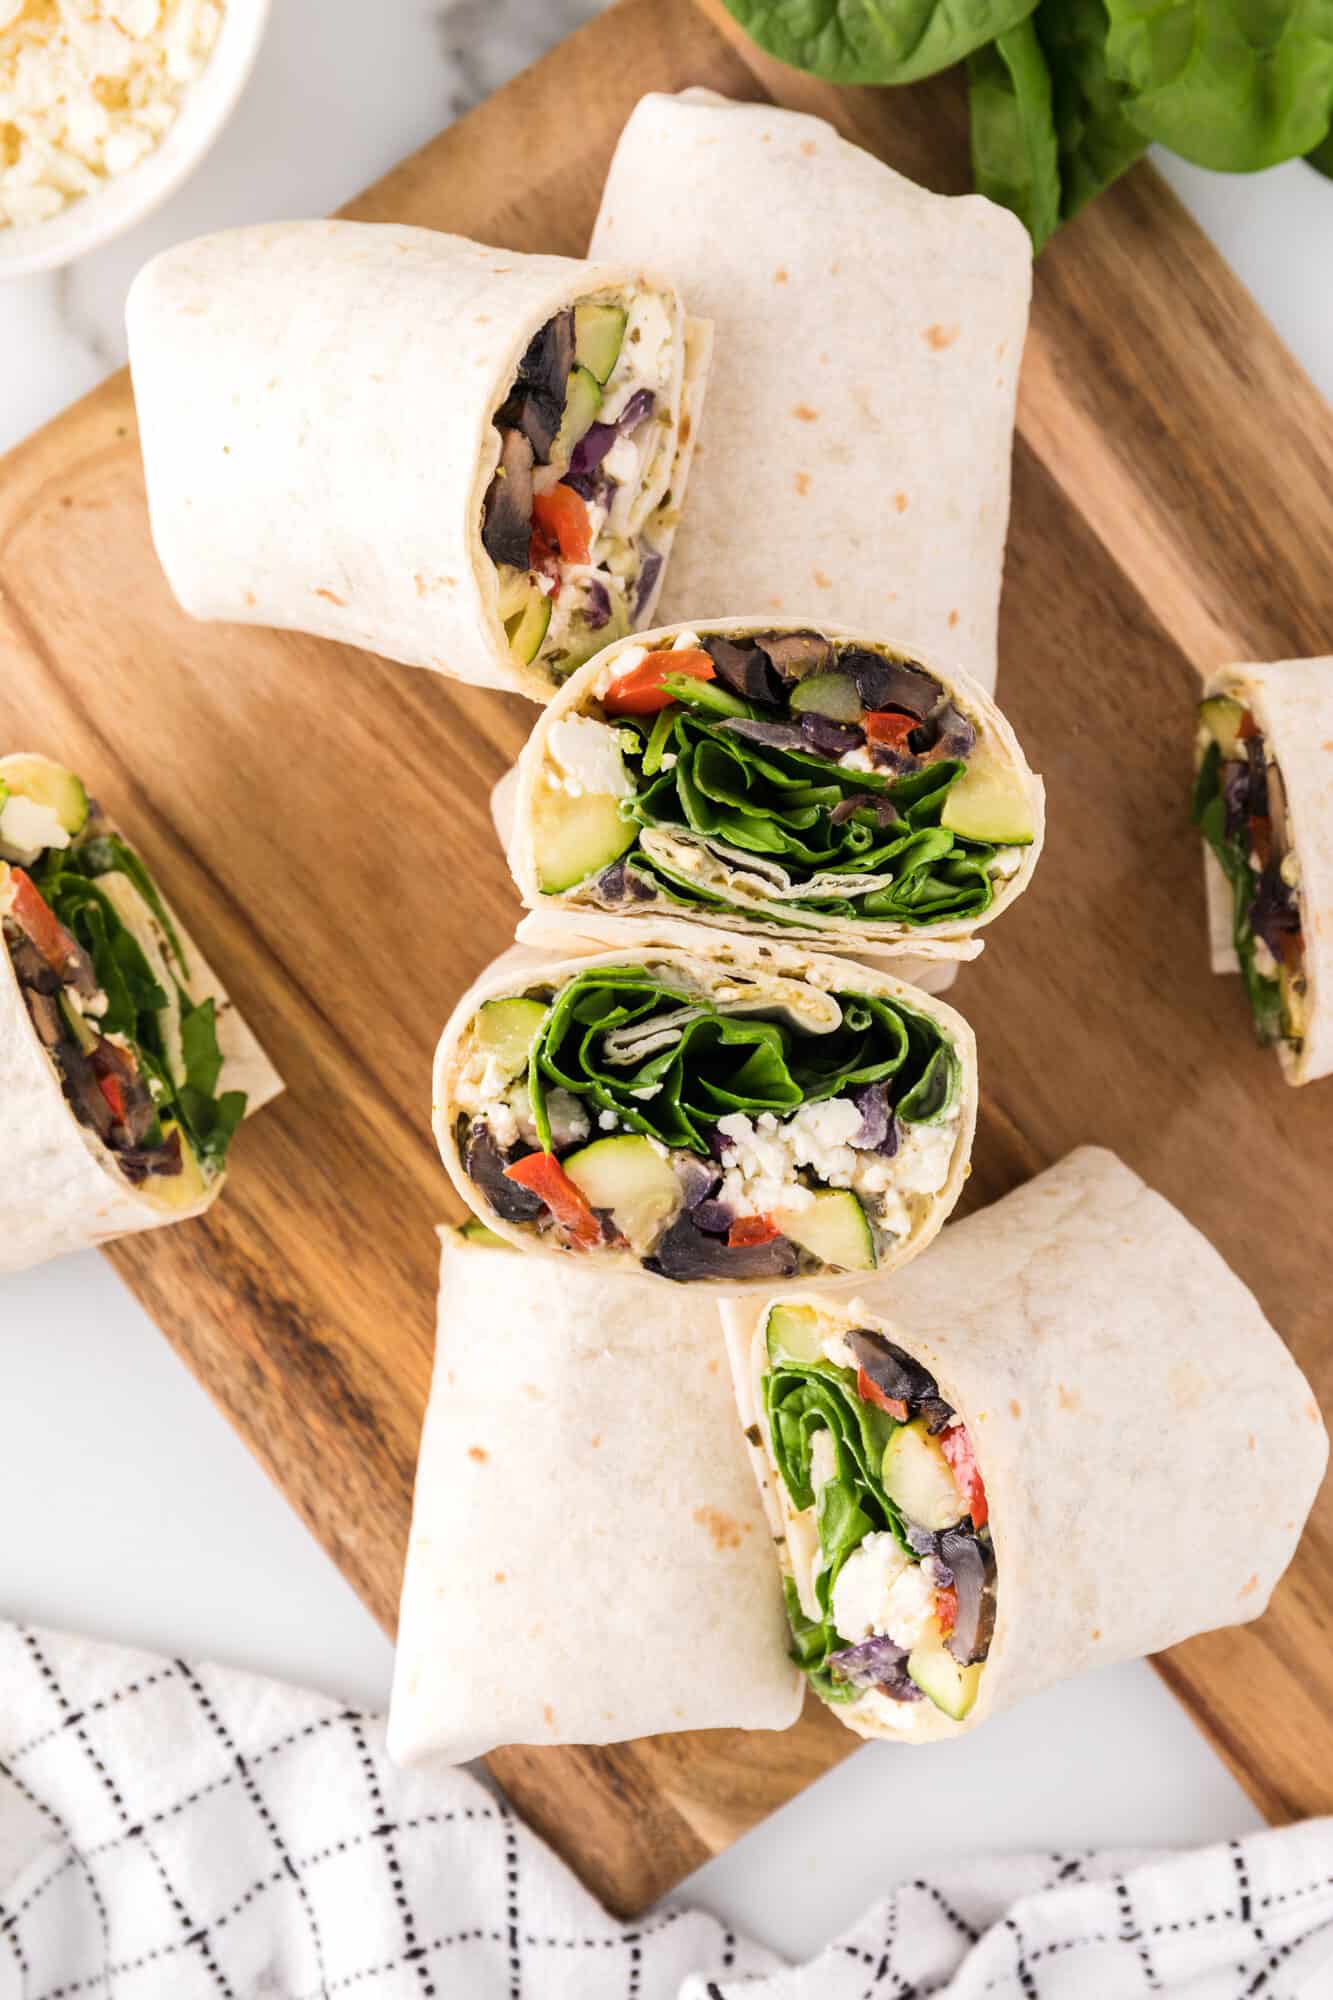 Assorted halves of roasted vegetable wraps on a wooden cutting board.